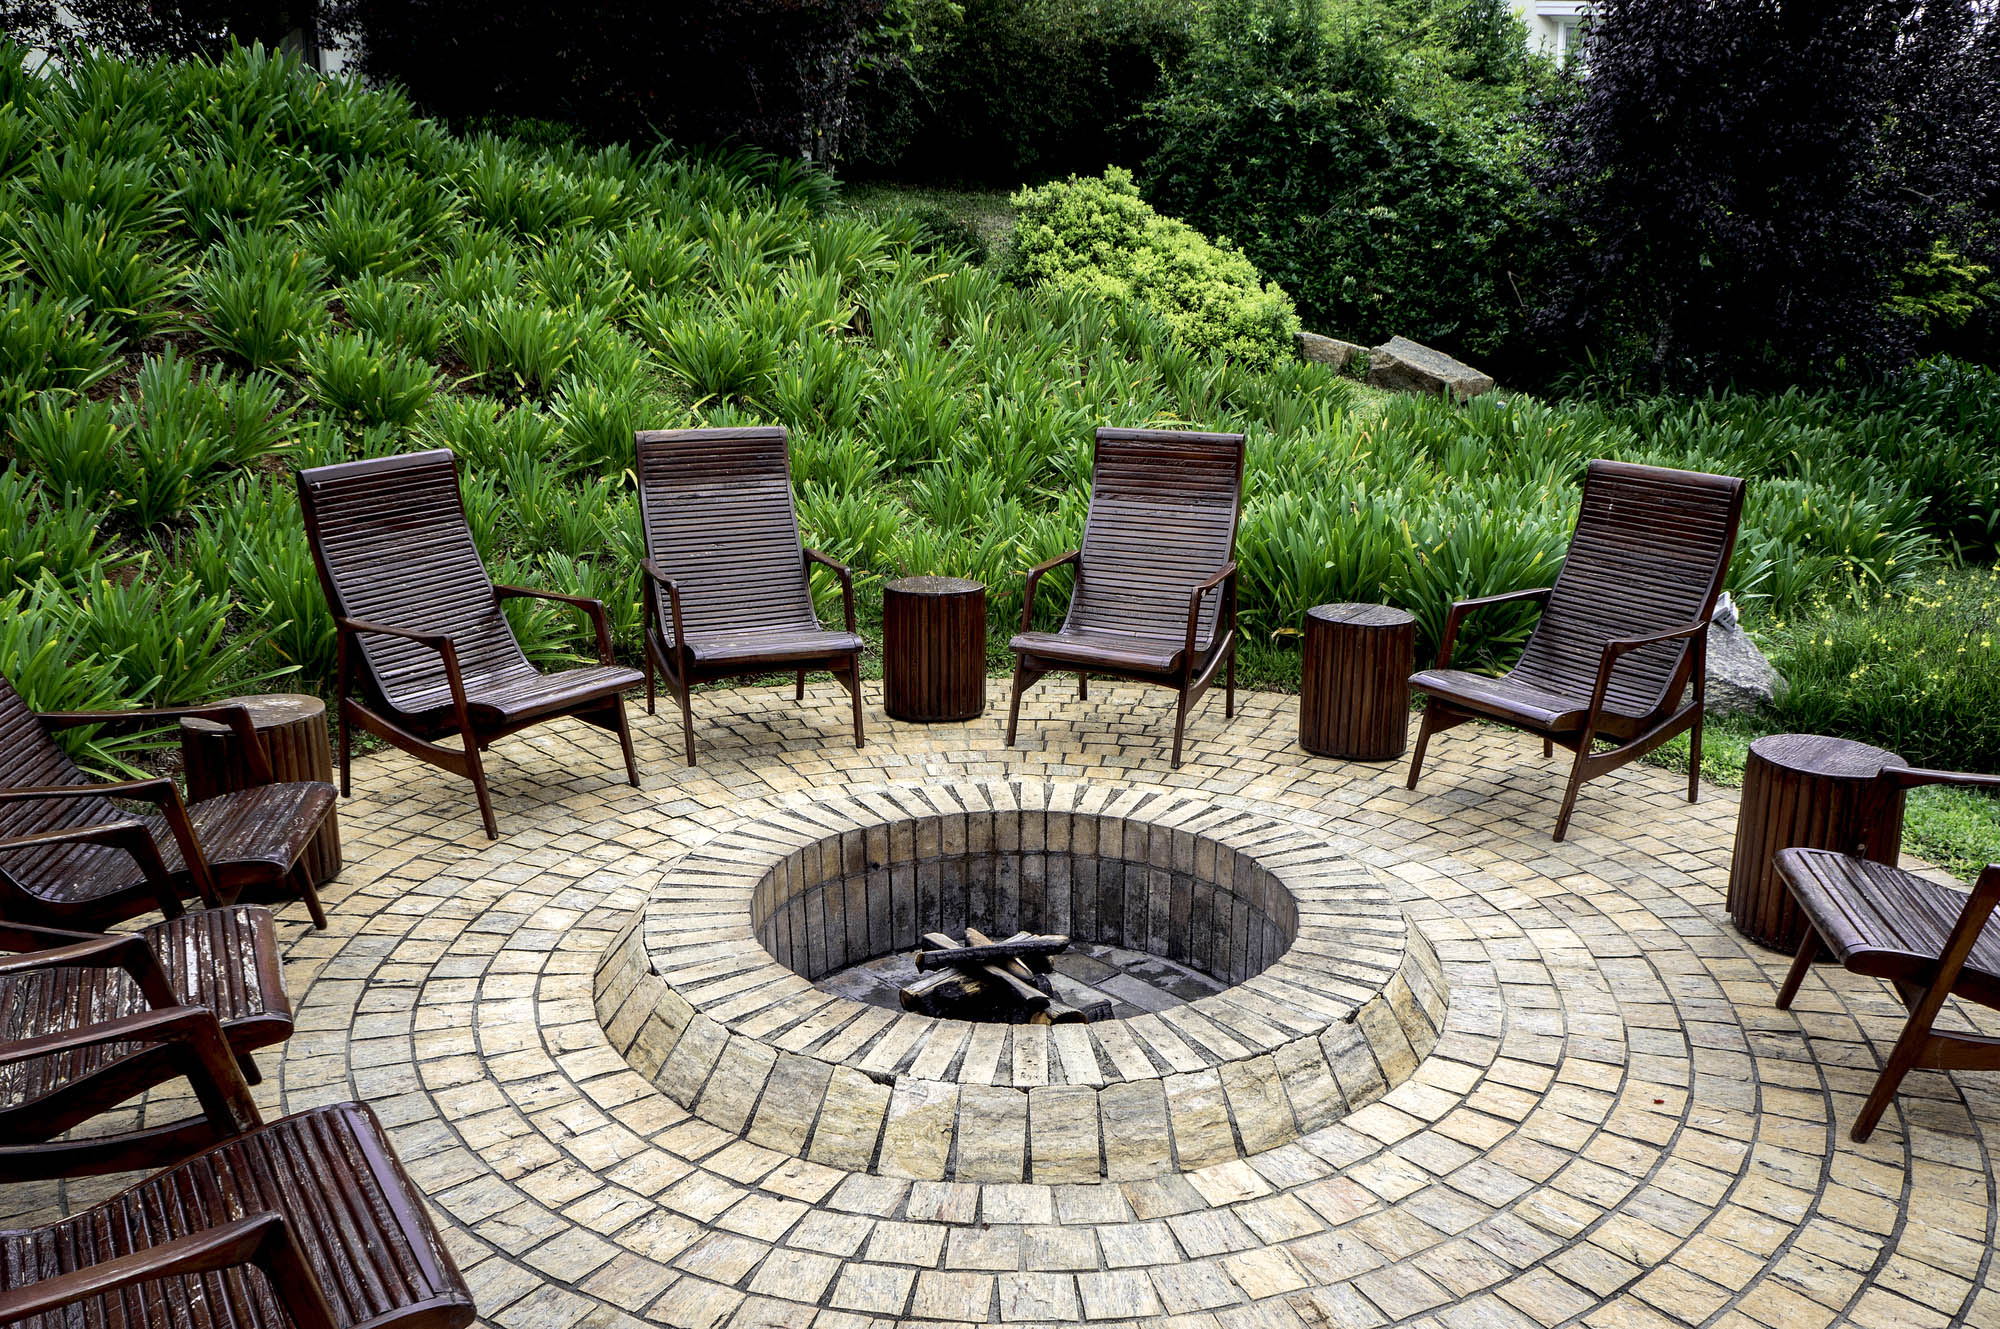 fitrepit for a relaxing outdoor space during COVID